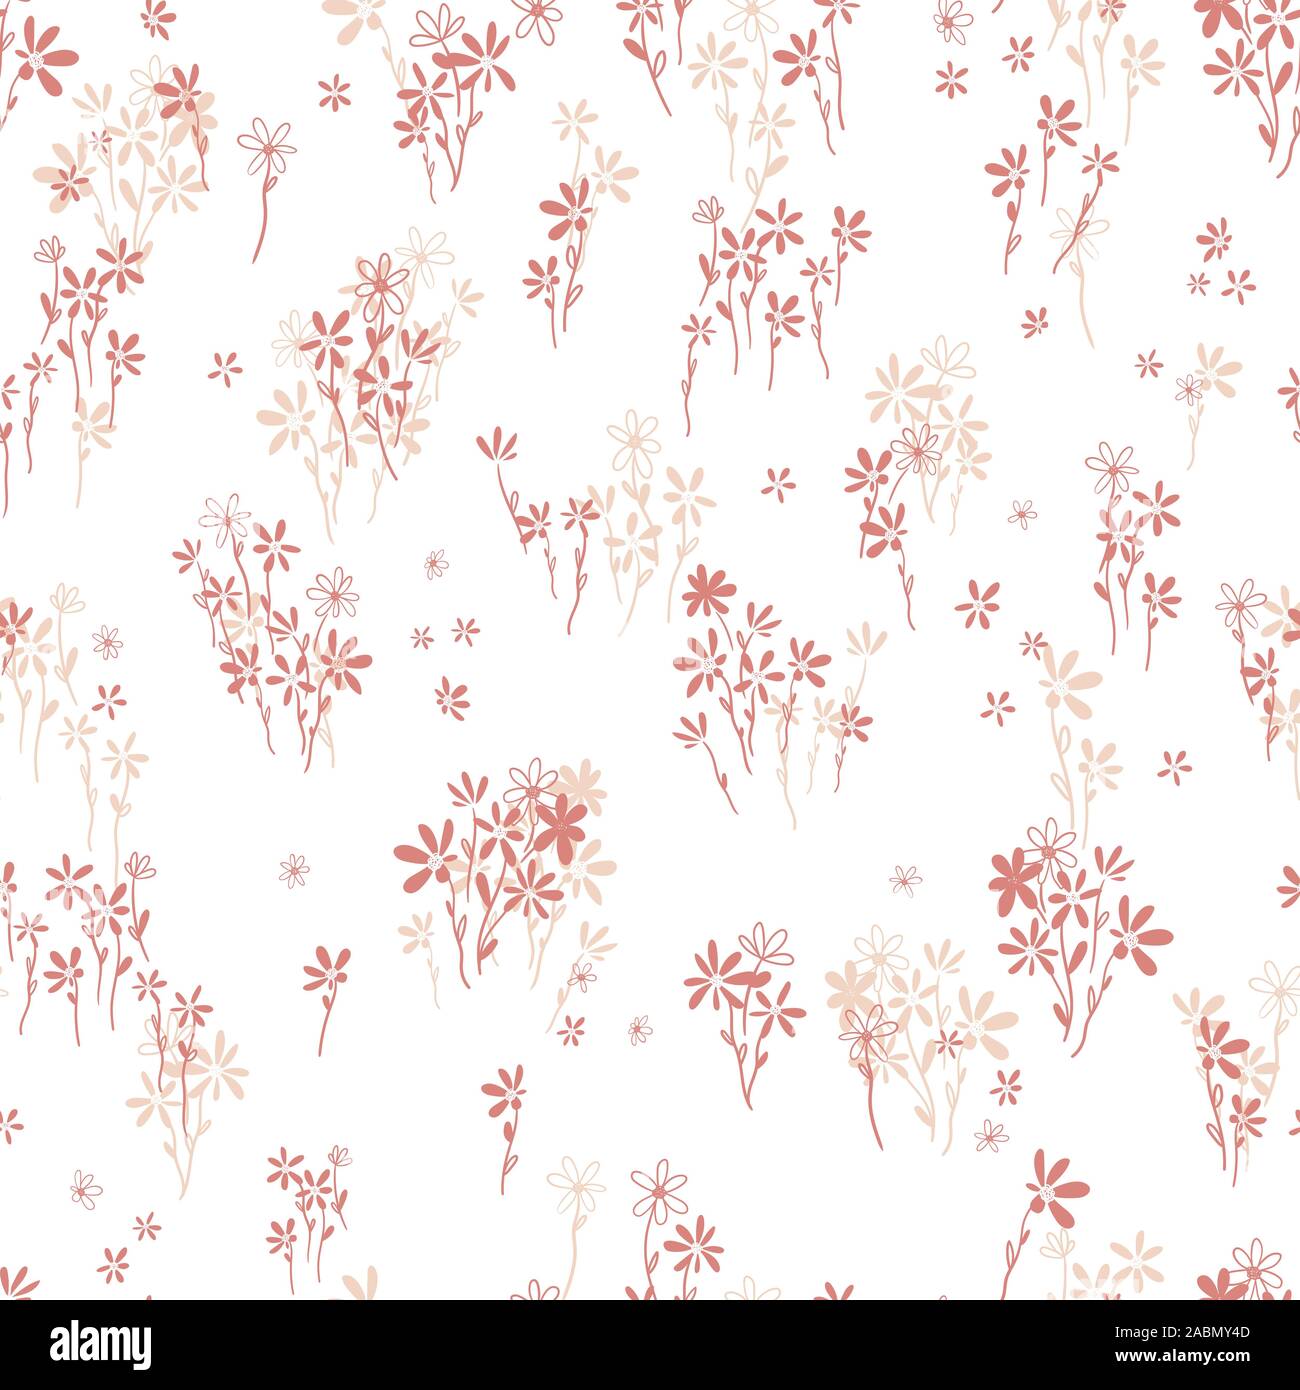 Folk Art Floral Seamless Pattern Small Flower Wallpaper Cute Ditsy Print  Stock Illustration  Download Image Now  iStock